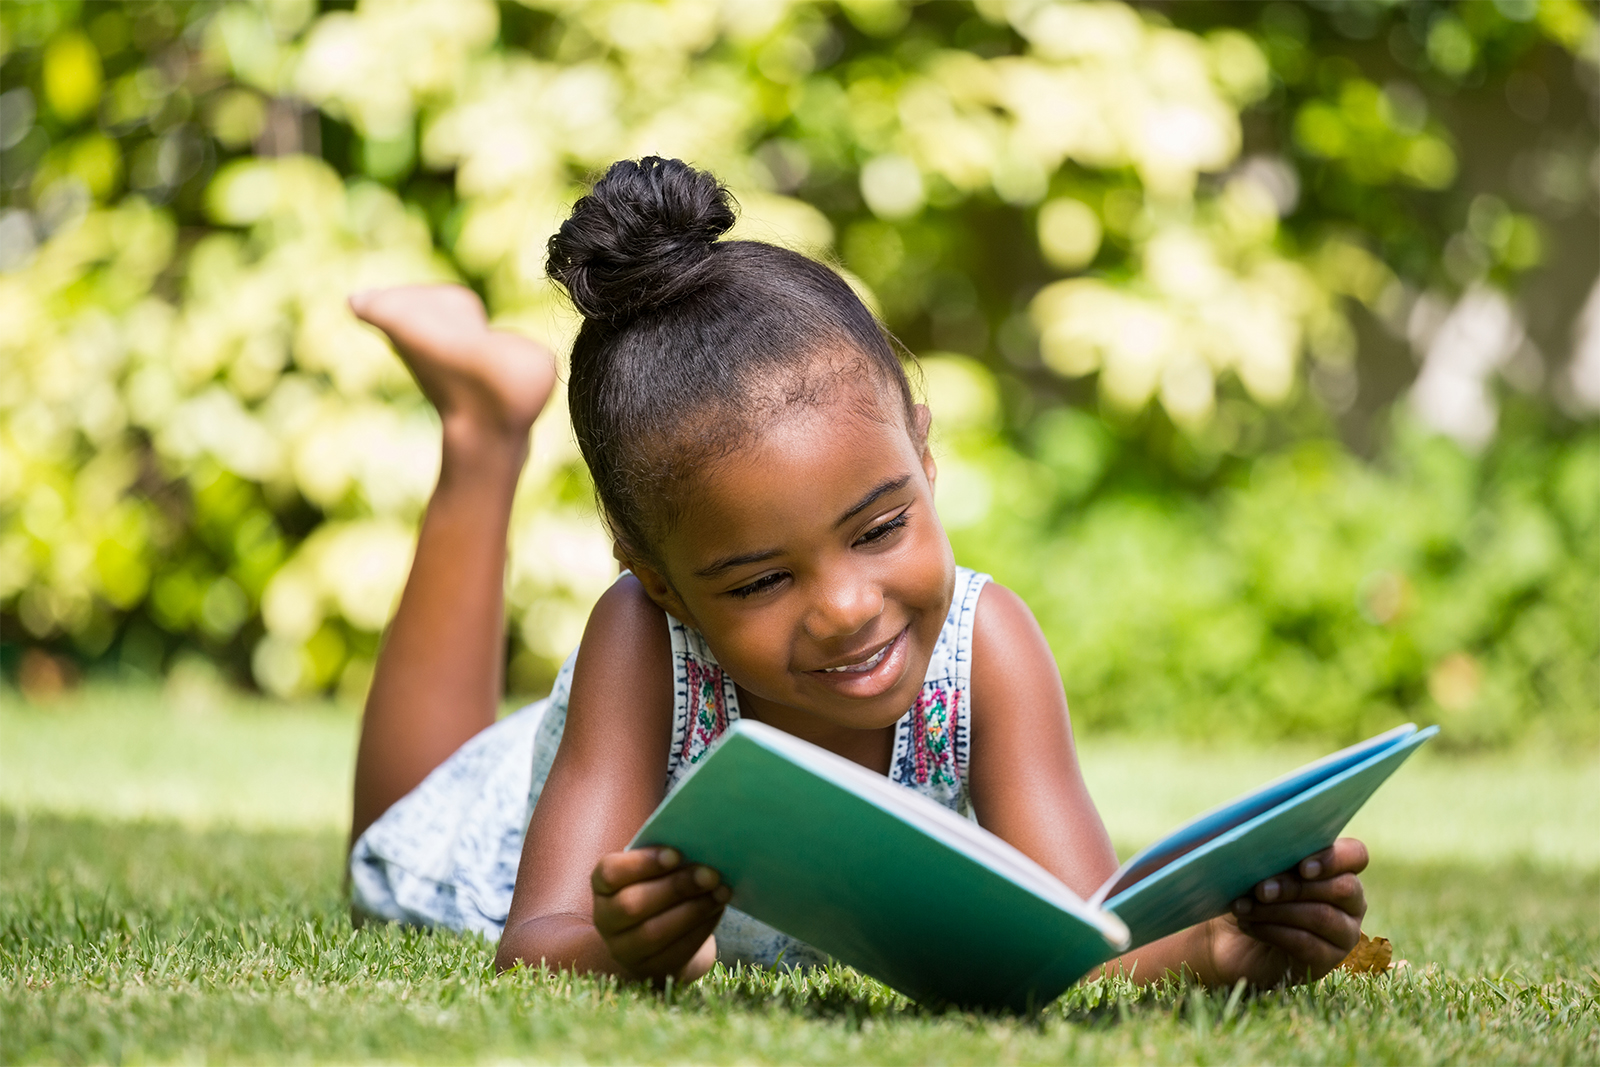 7 Books to Help Your Child Look Forward to Visiting Your Pediatric Dentist